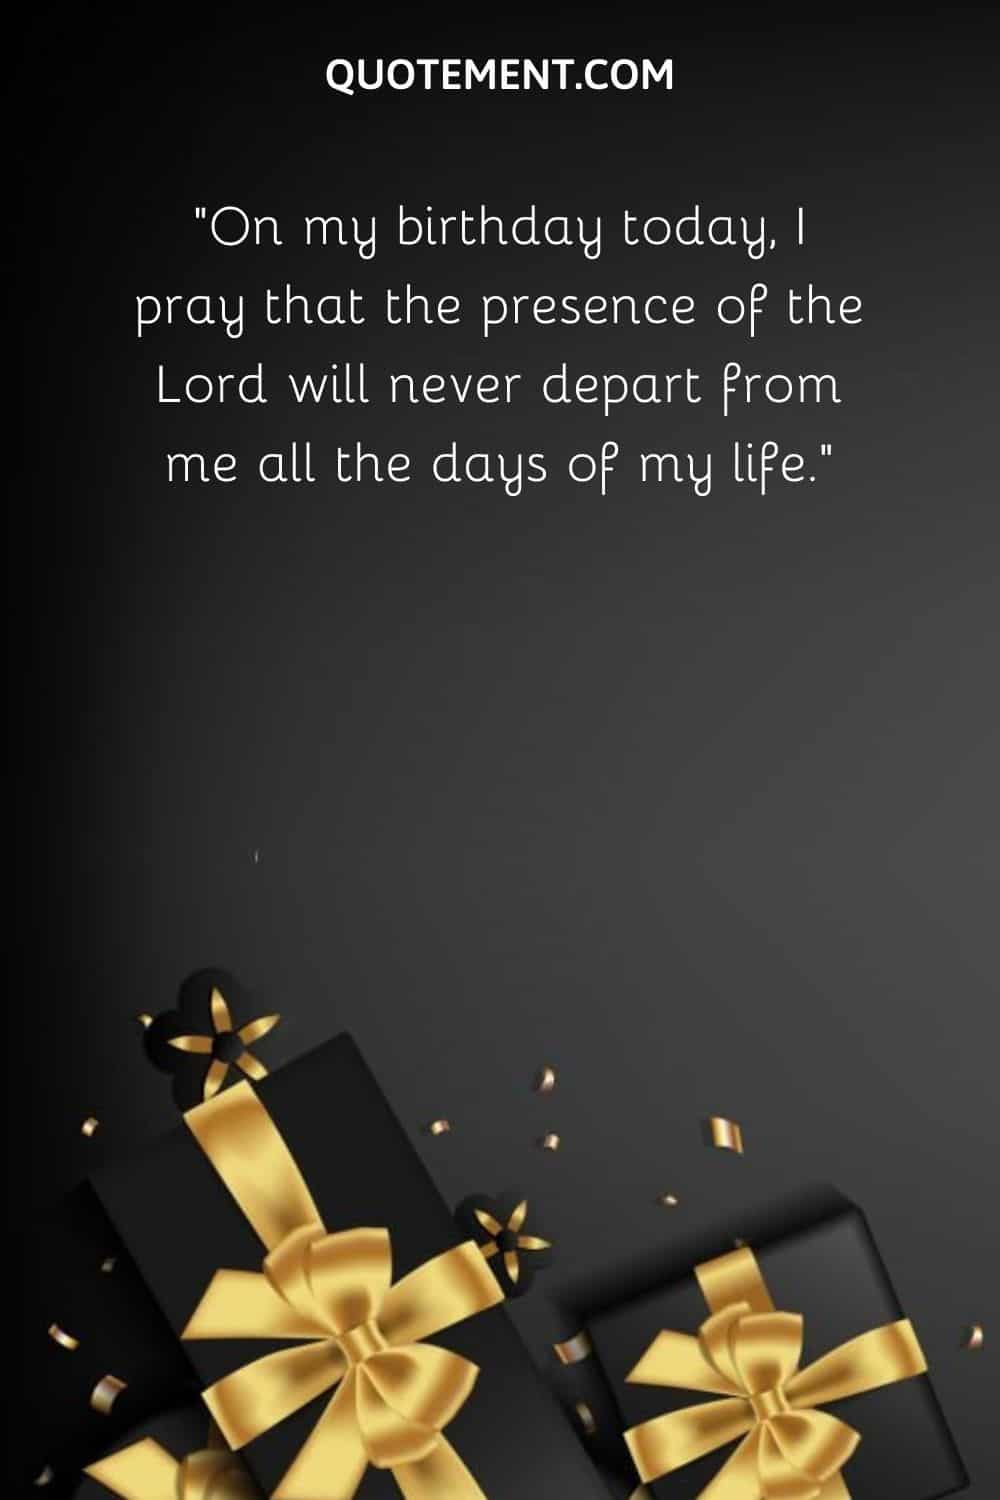 “On my birthday today, I pray that the presence of the Lord will never depart from me all the days of my life.”